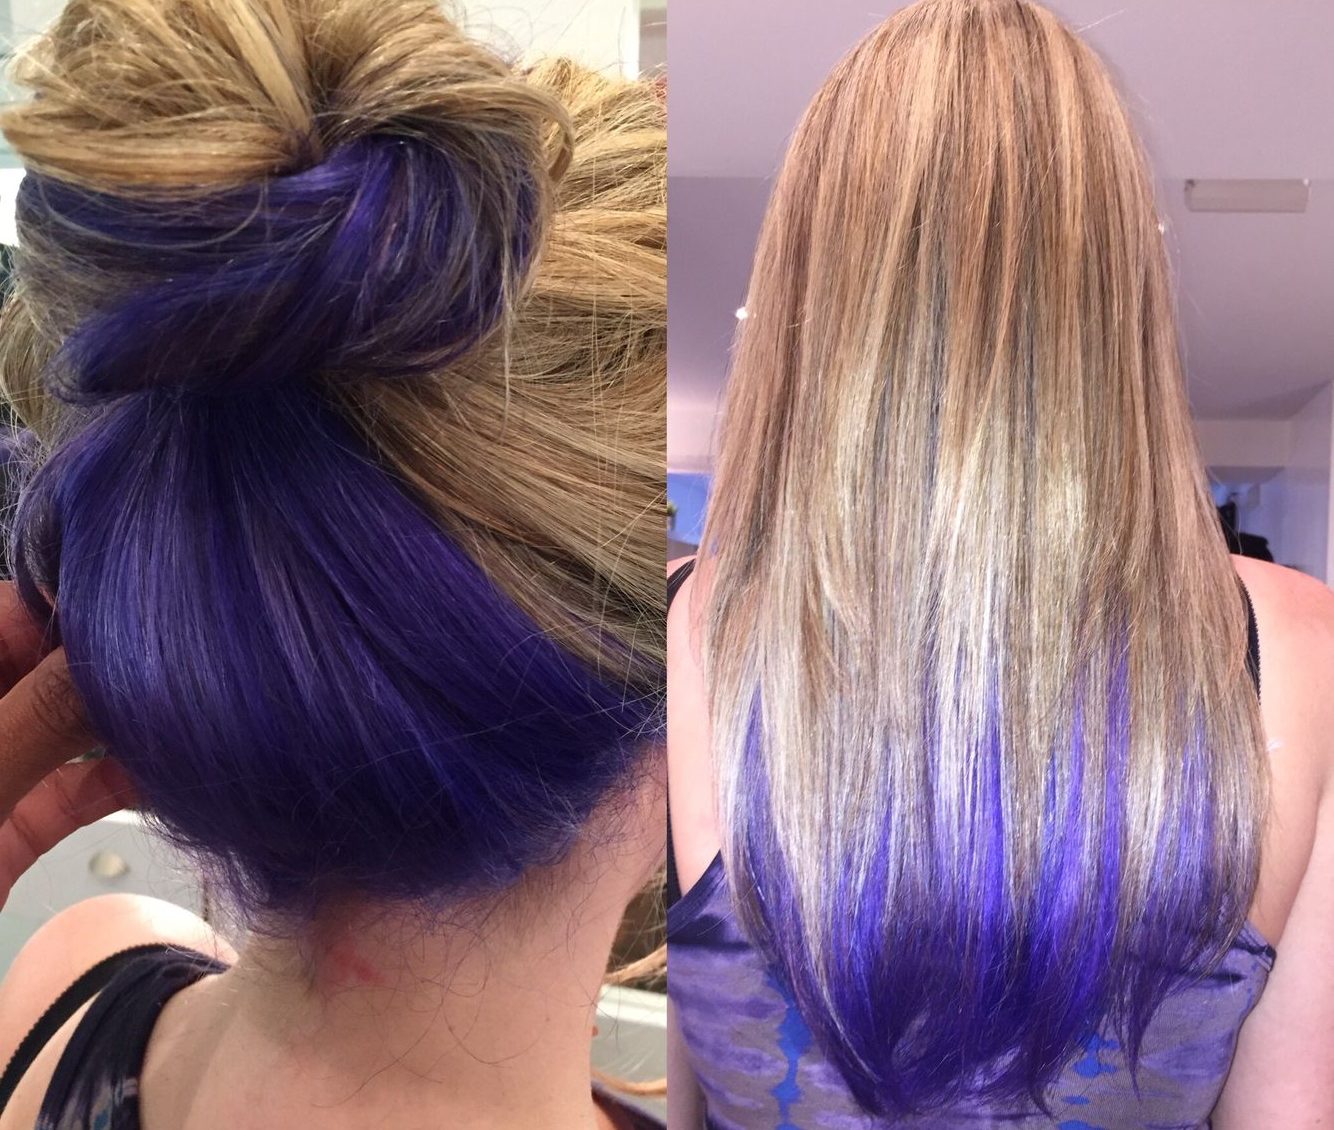 Way To Dye The Two Tones Hair At Home | Pax Angeli